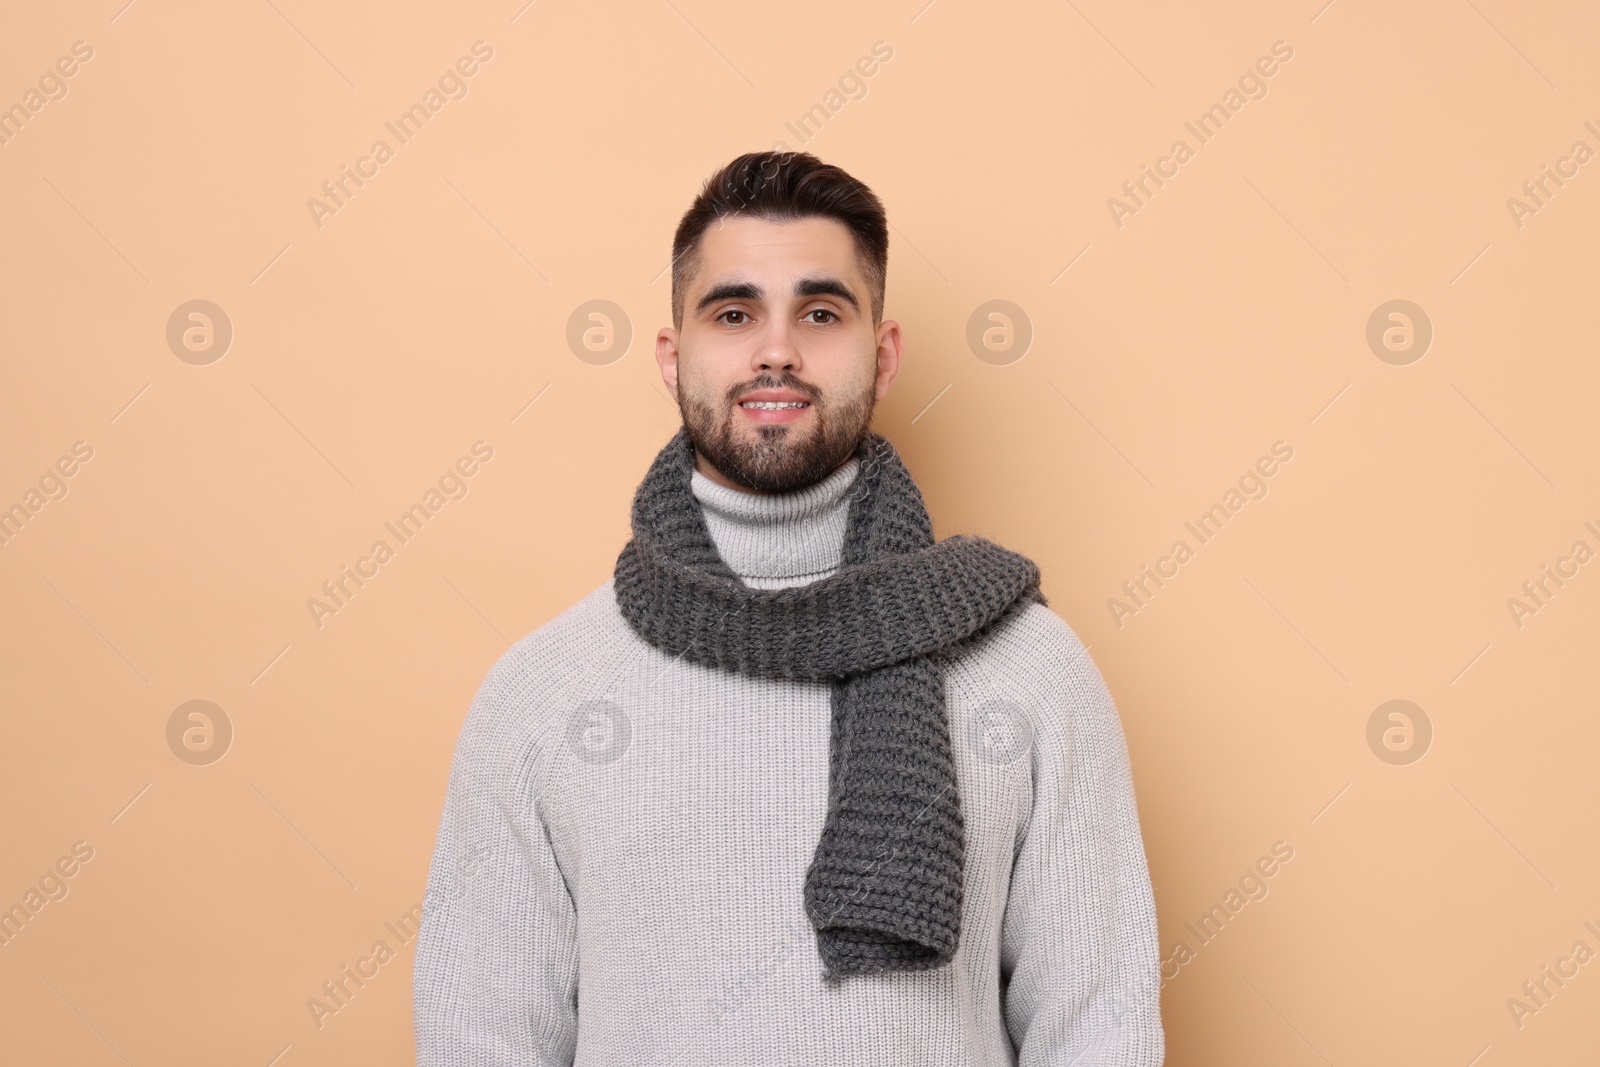 Photo of Smiling man in knitted scarf on beige background